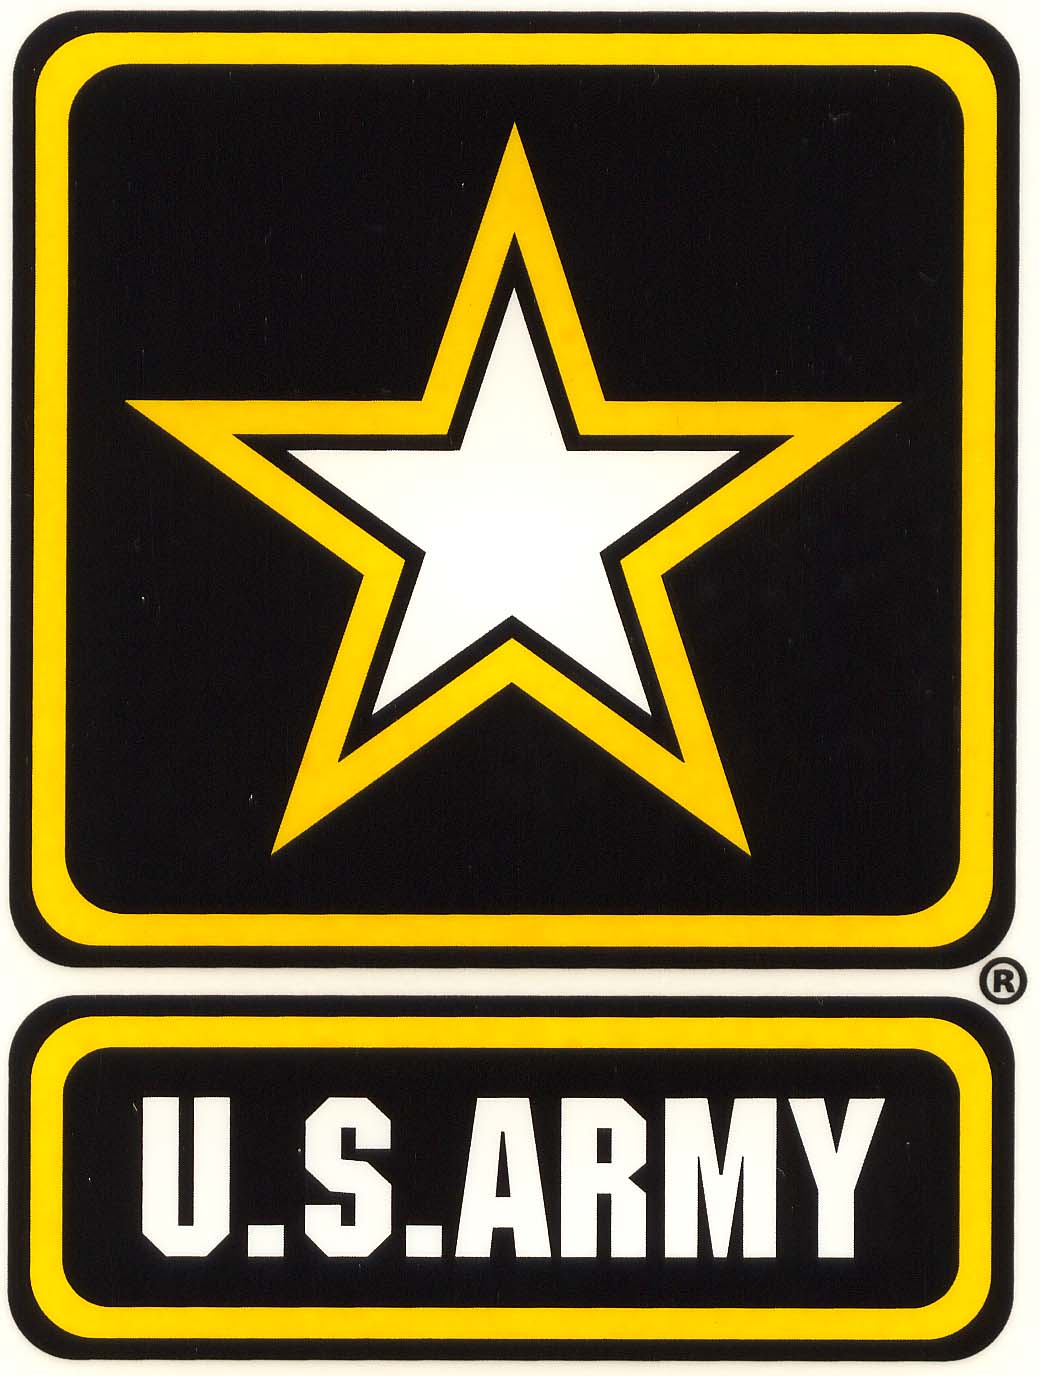 46 Us Army Logo Vector Free Cliparts That You Can Download To You